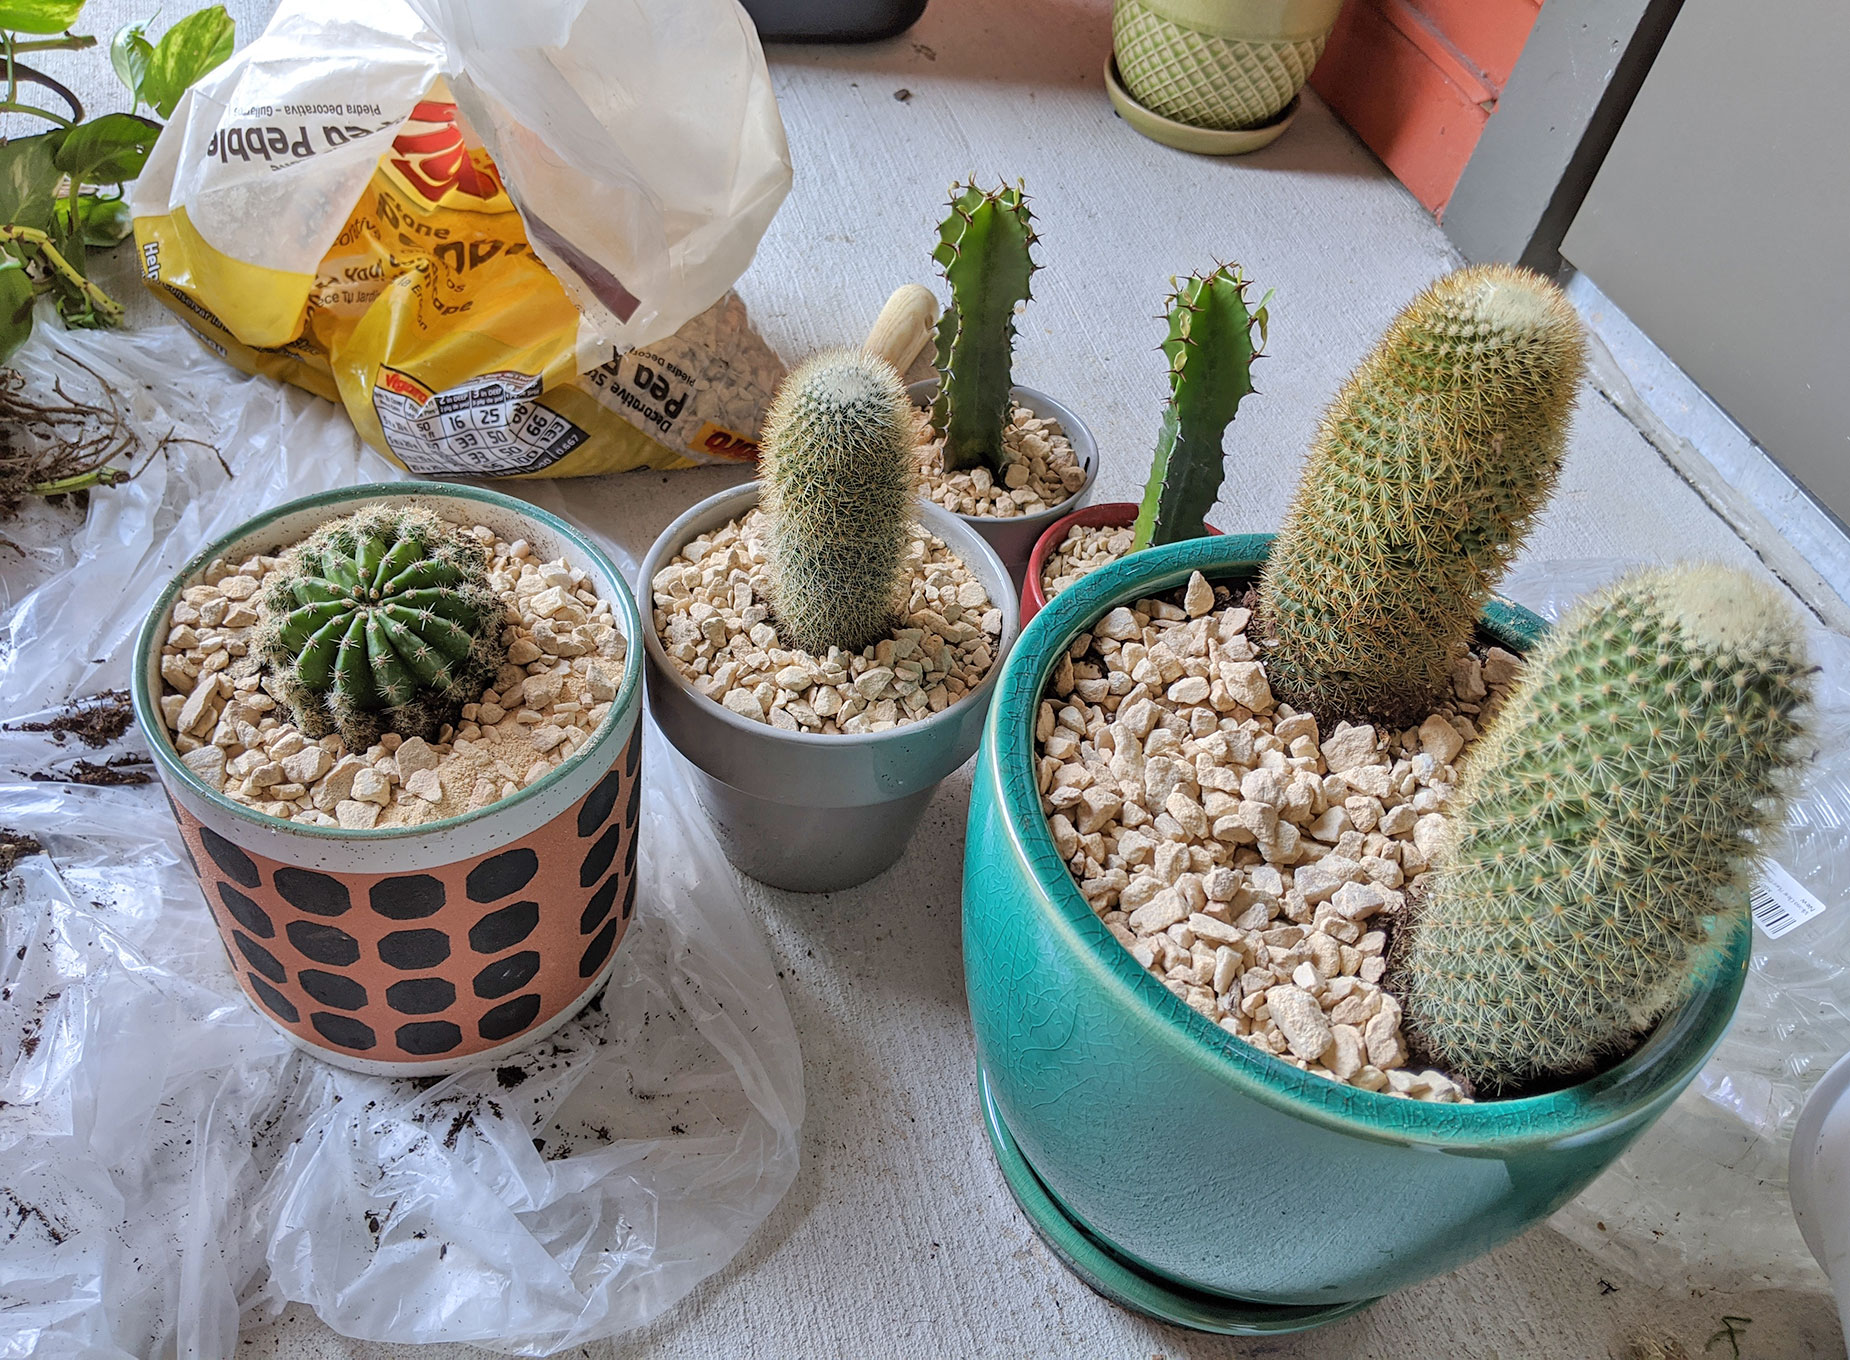 The new cacti that I bought to replace my other plants.